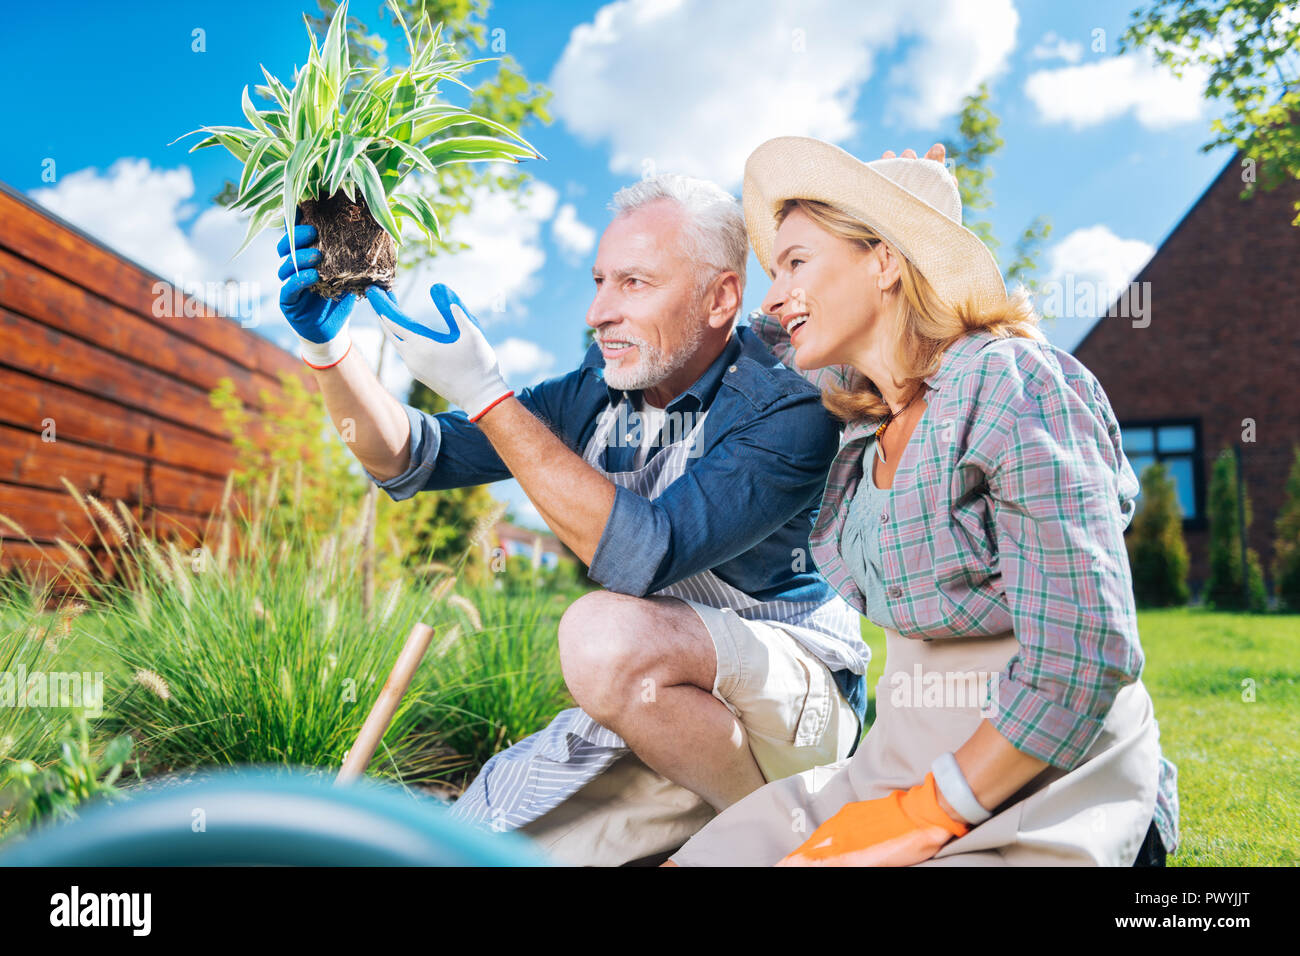 Happy loving couple feeling contended looking at their new green home plant Stock Photo